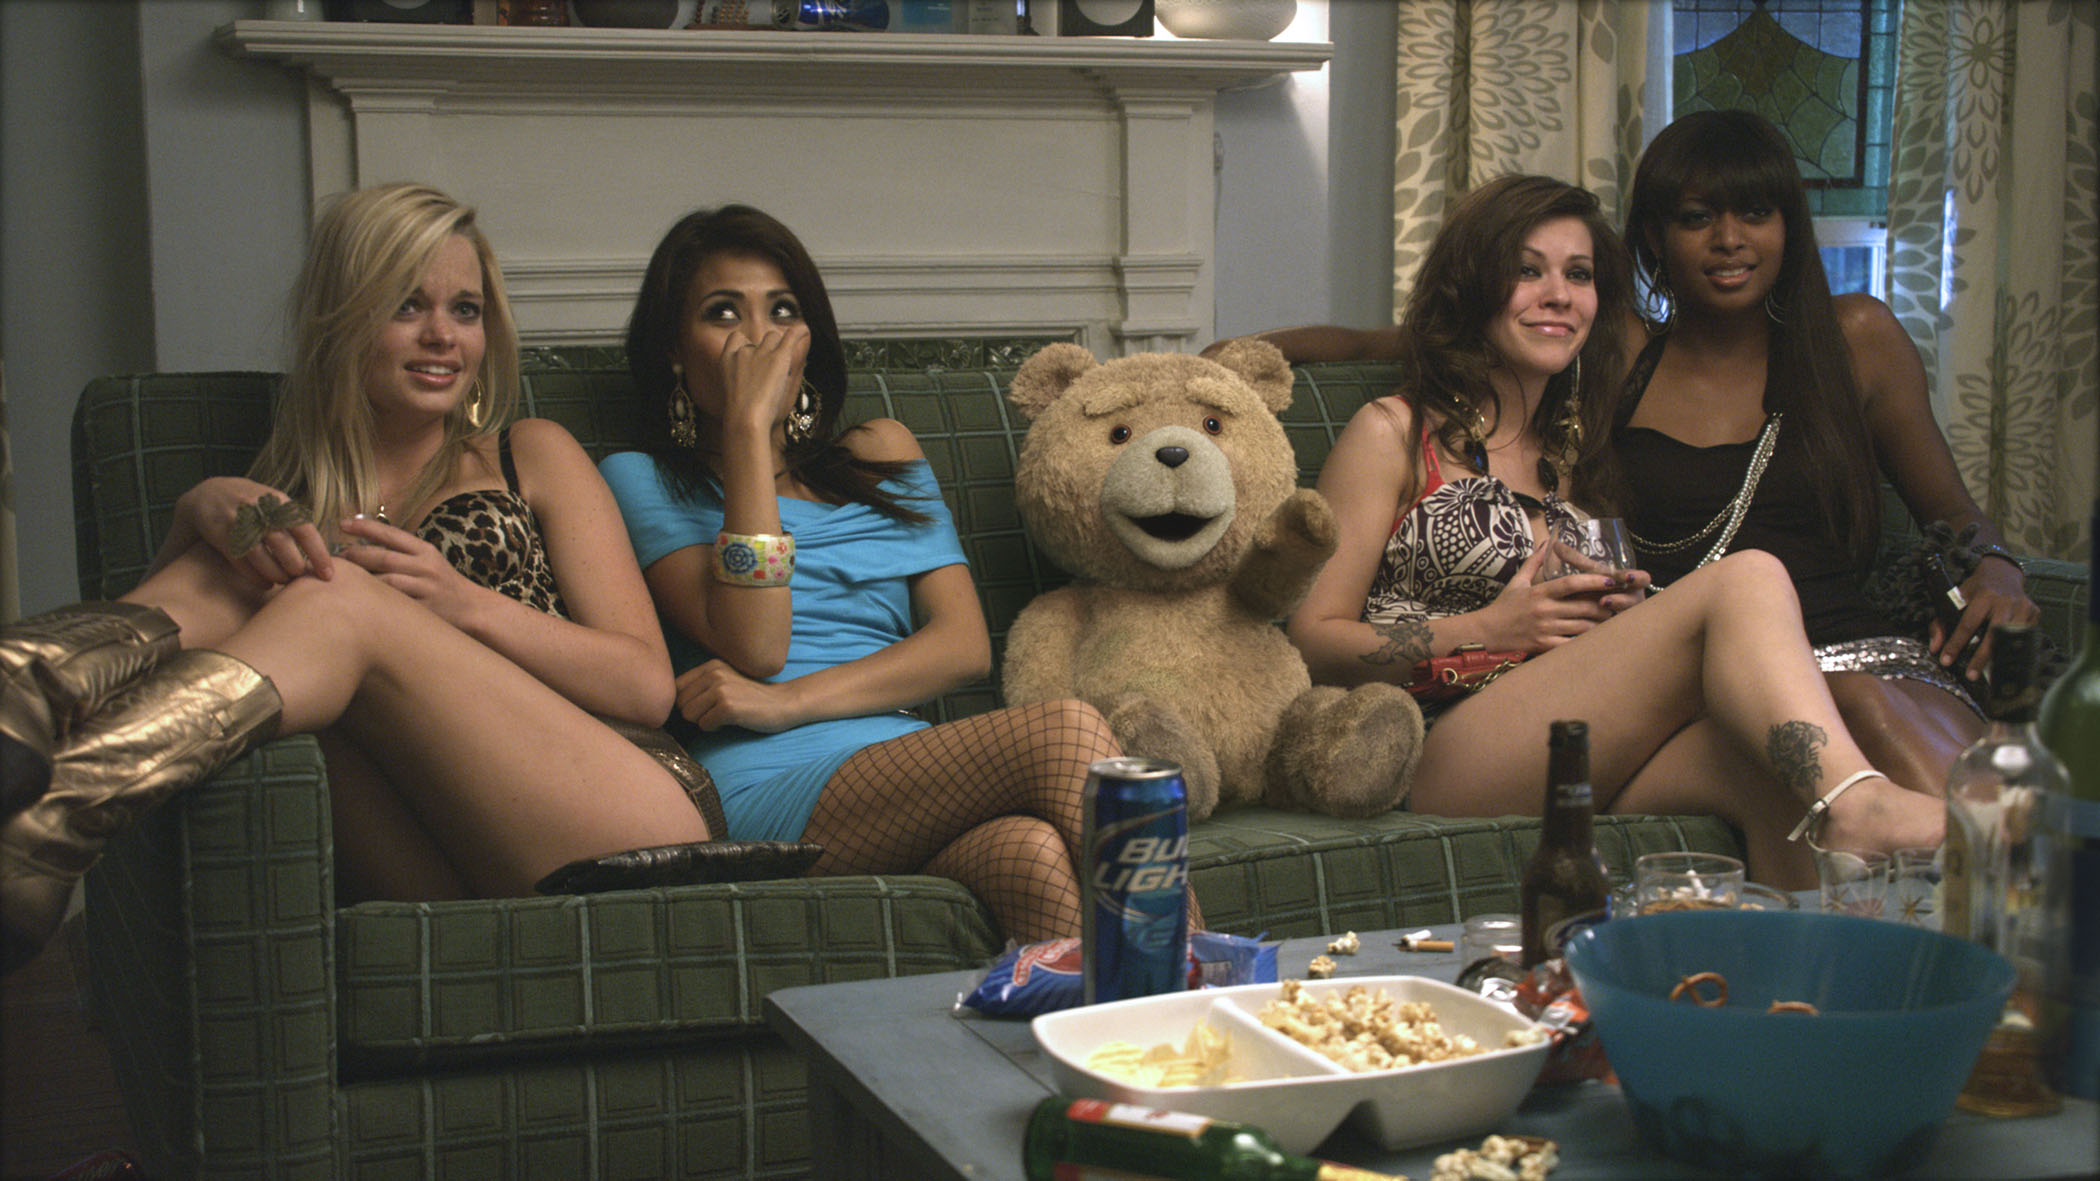 TED 2012 Chanty Sok as 